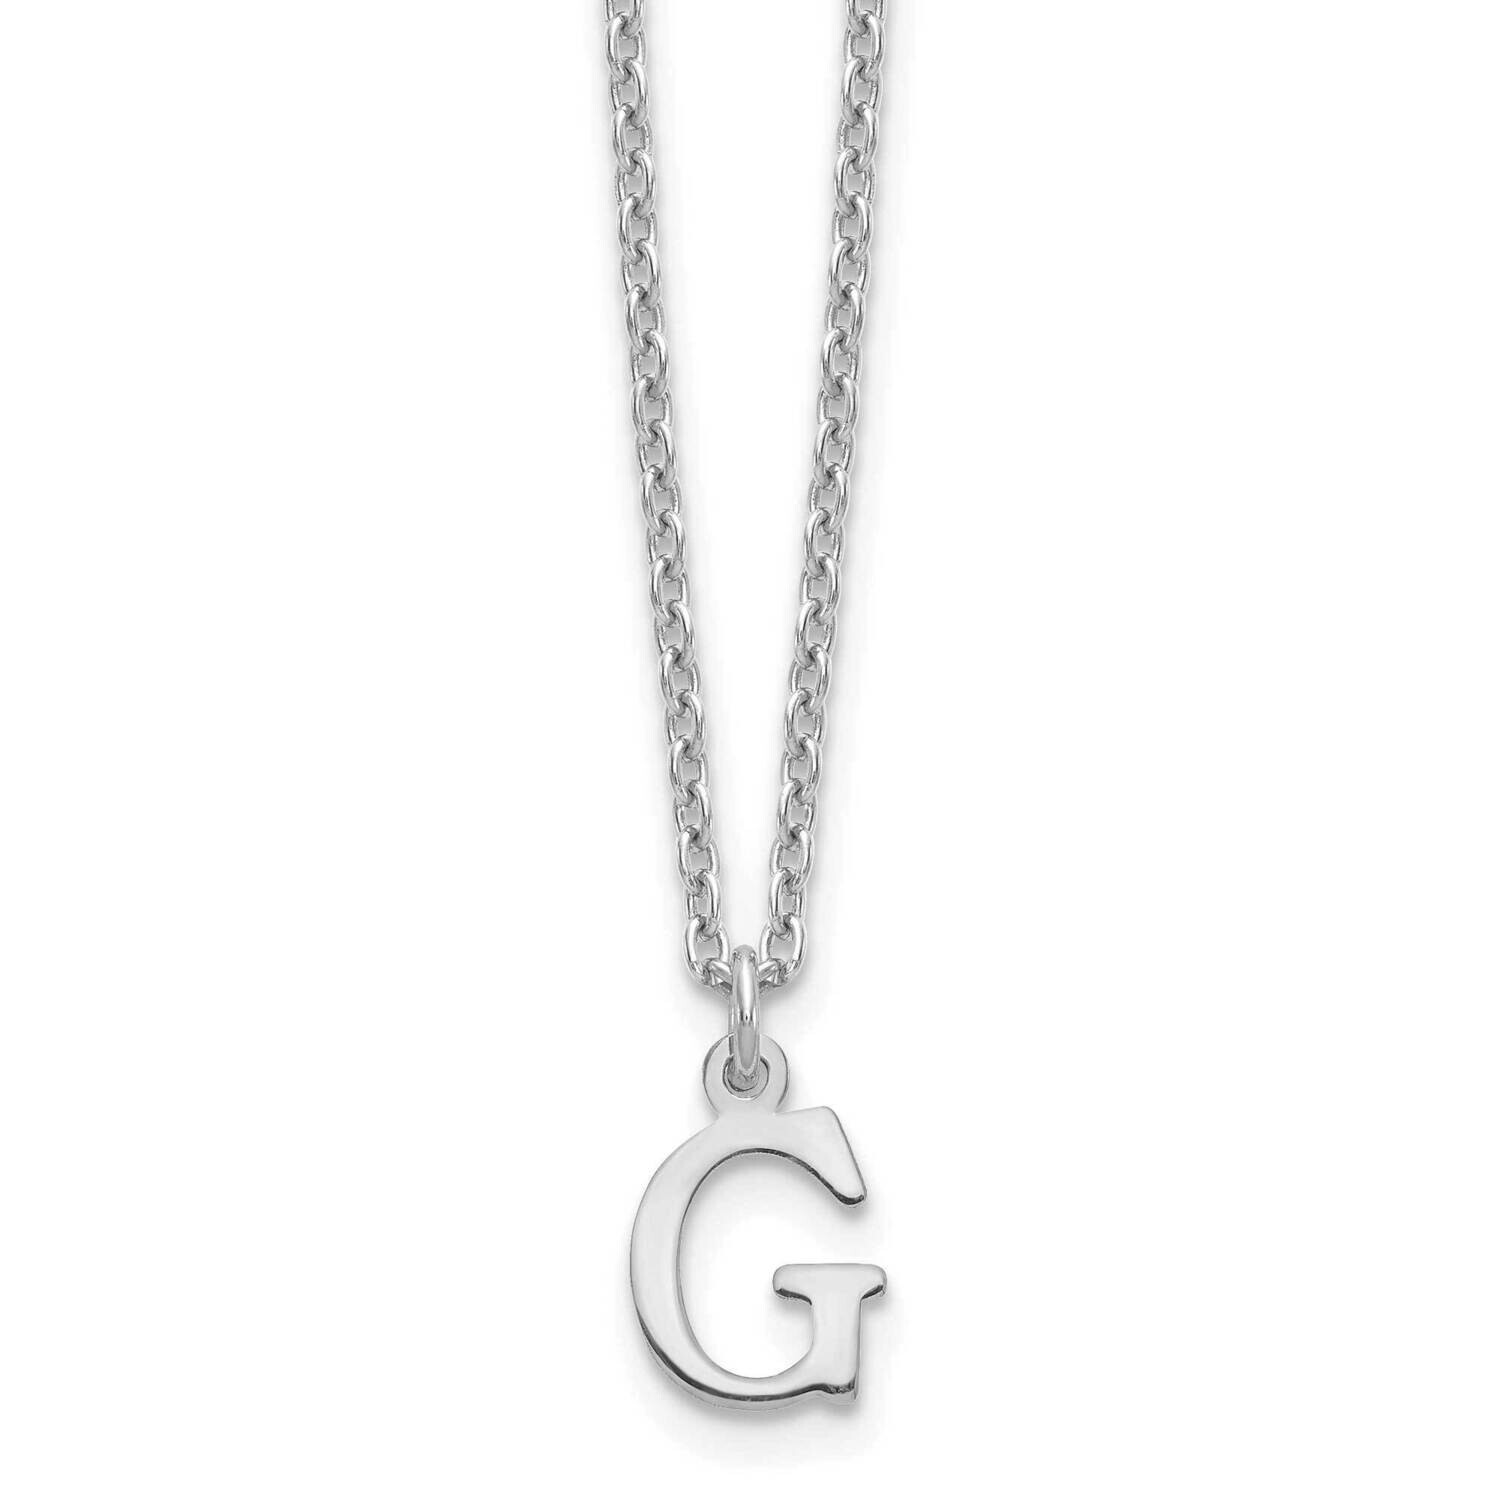 Cutout Letter G Initial Necklace Sterling Silver Rhodium-Plated XNA727SS/G